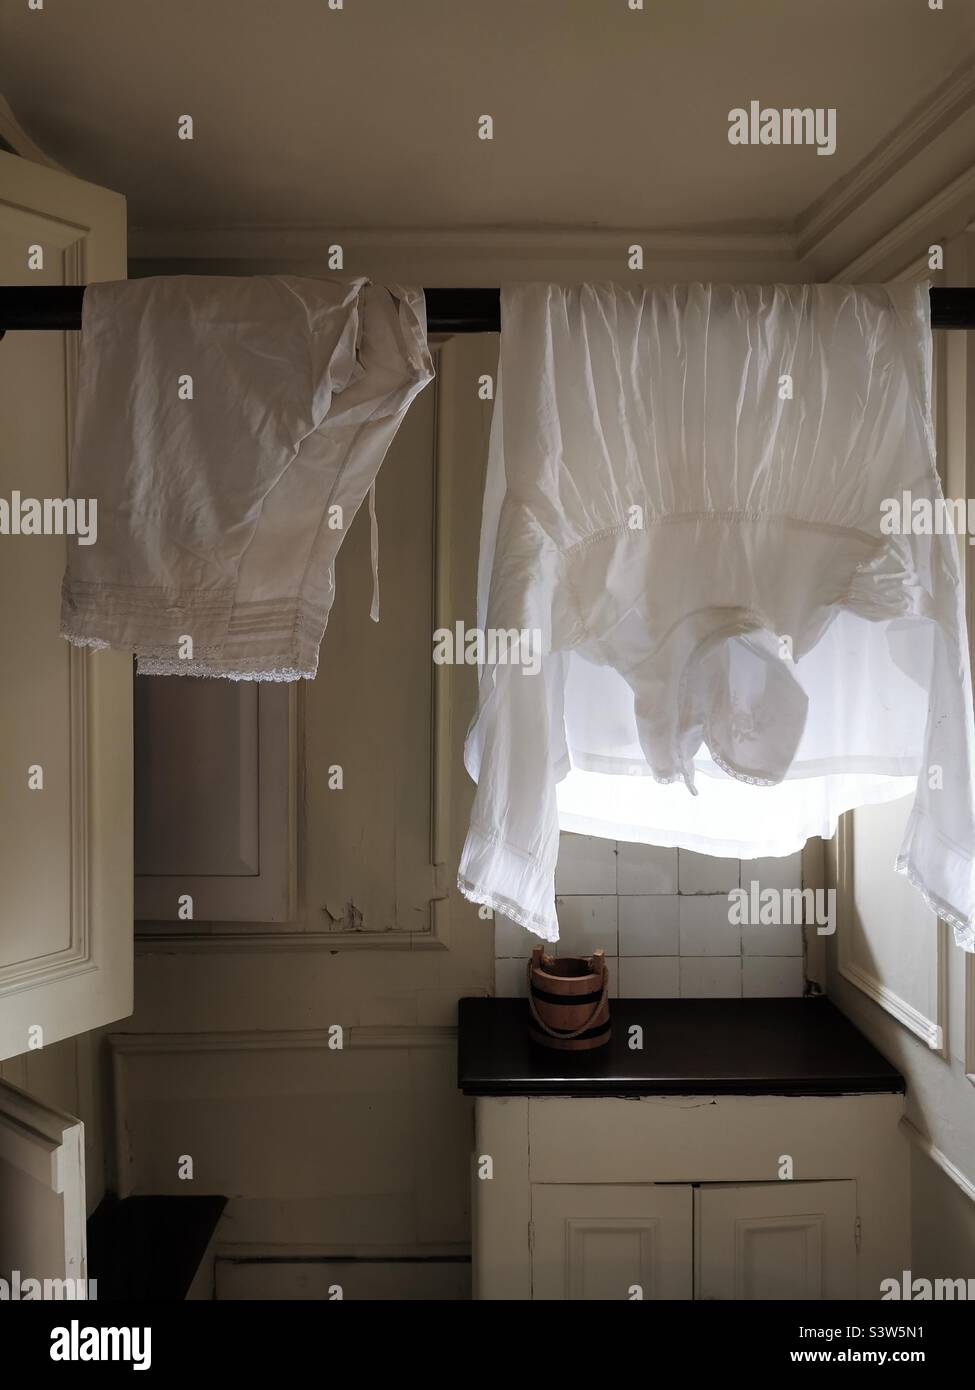 old style linen hanging to dry in period laundry room Stock Photo